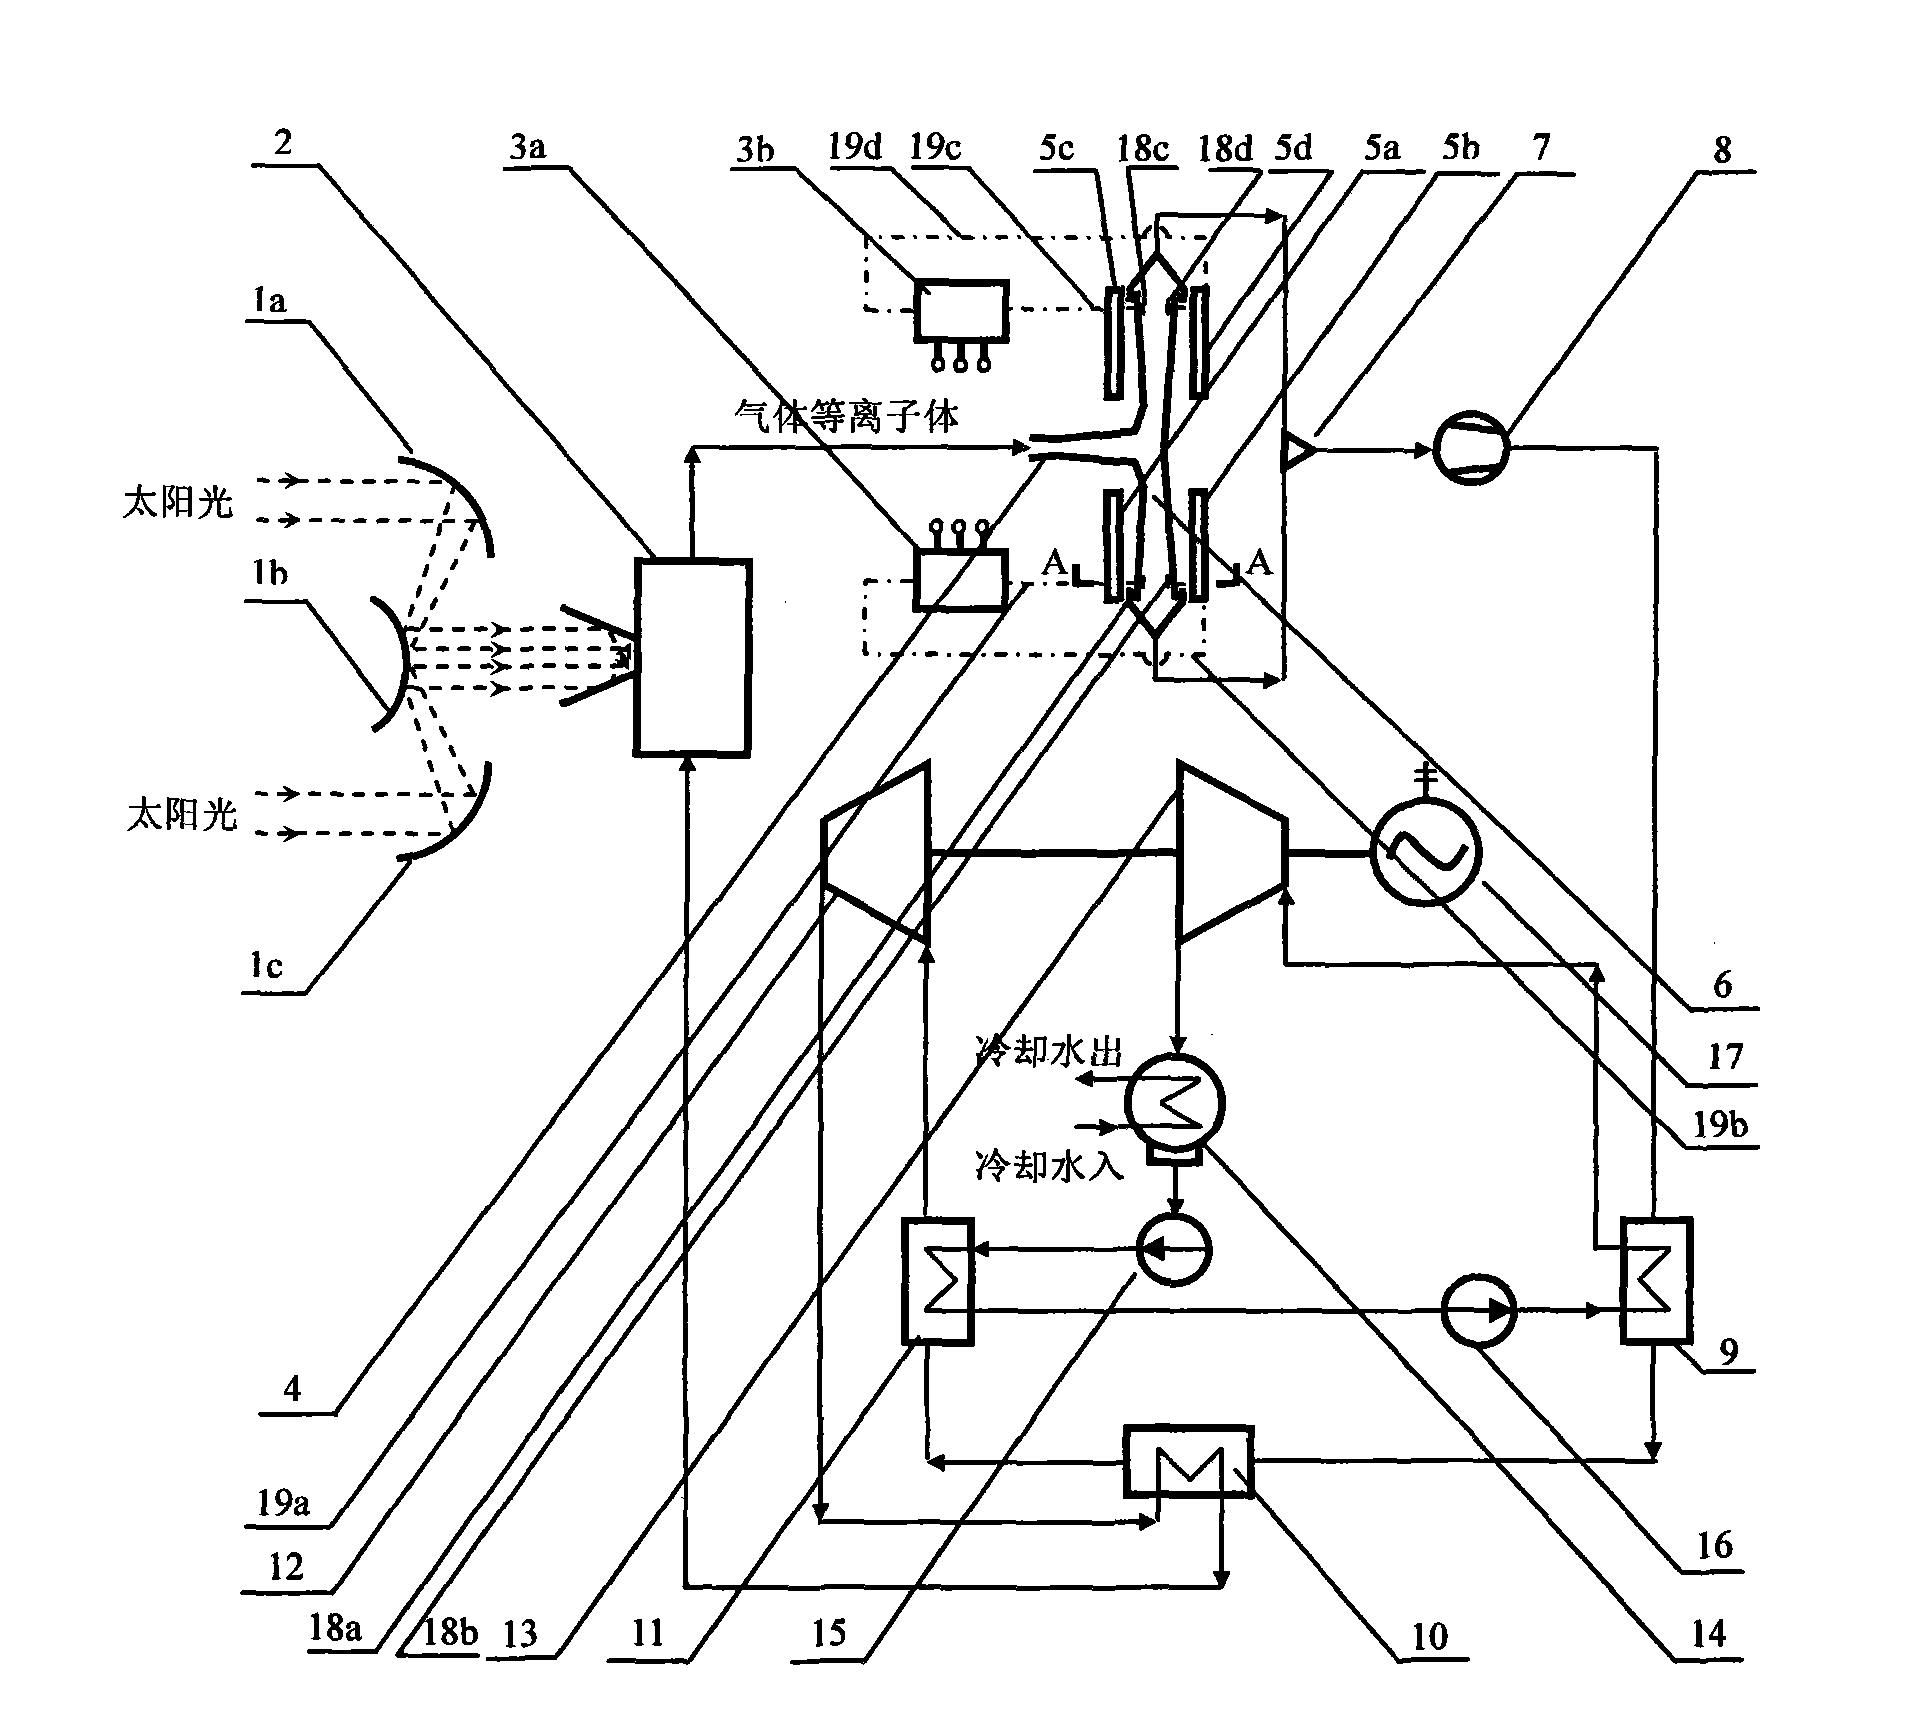 Solar energy-driven magnetic fluid and steam turbine coupled power generating system